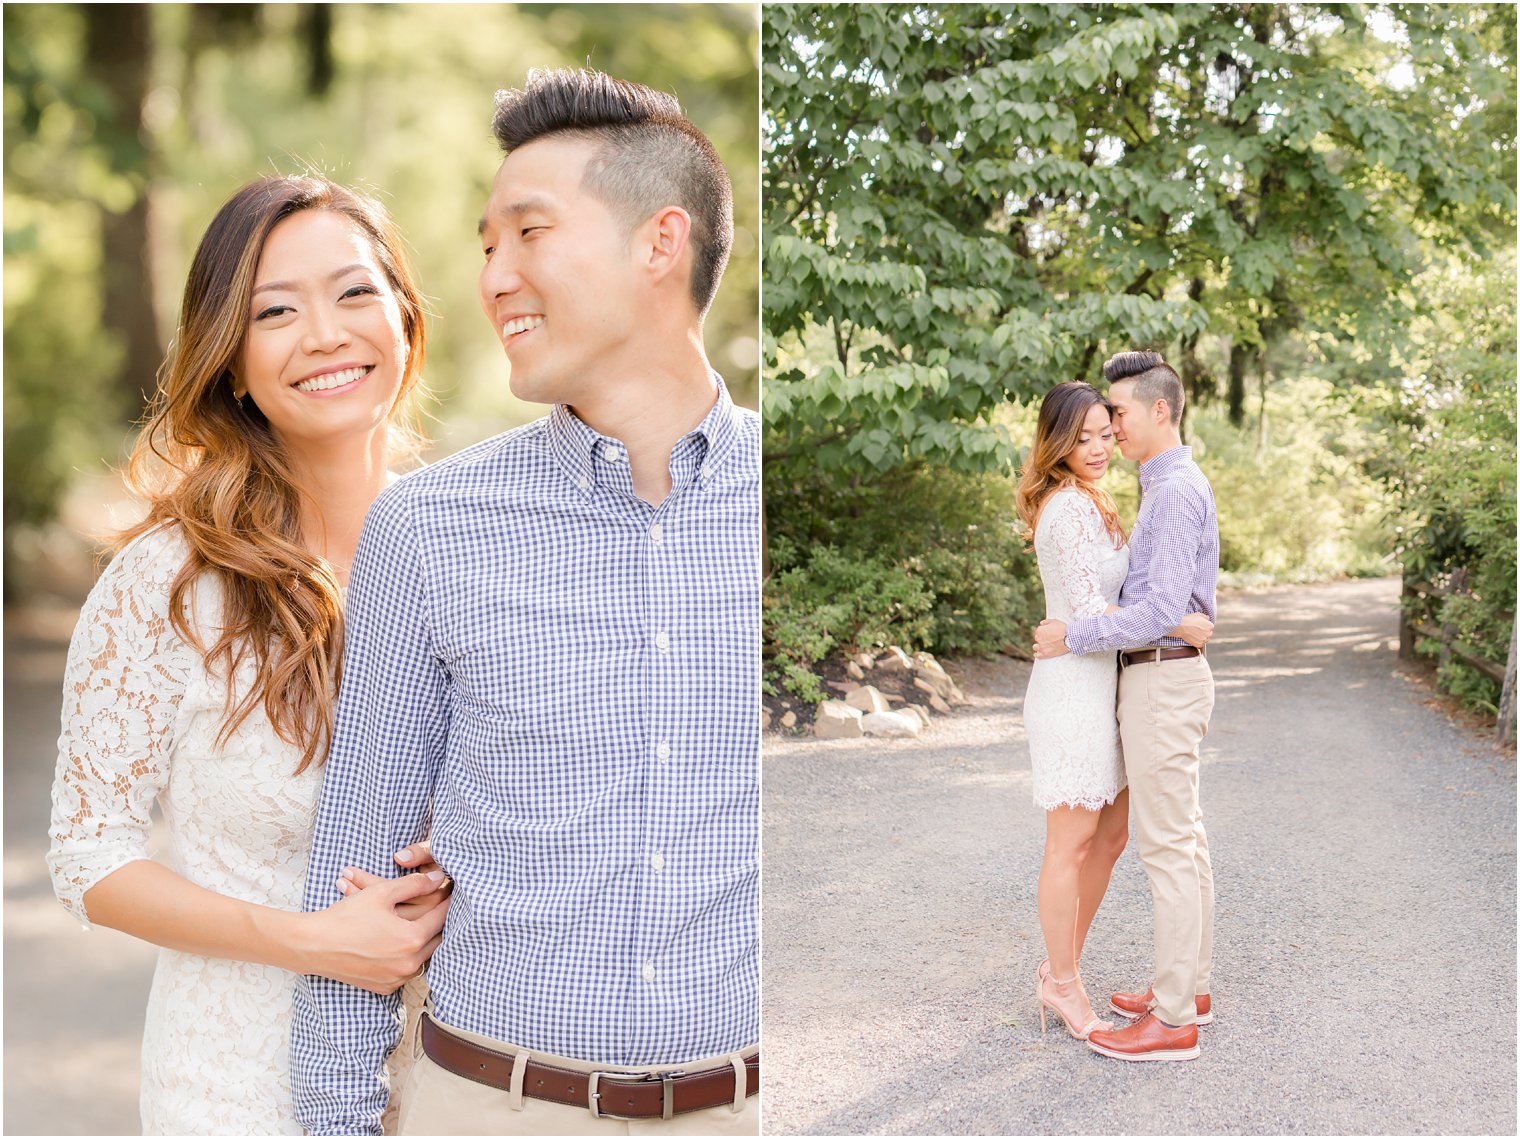 romantic NJ engagement session at Sayen House and Gardens with Idalia Photography